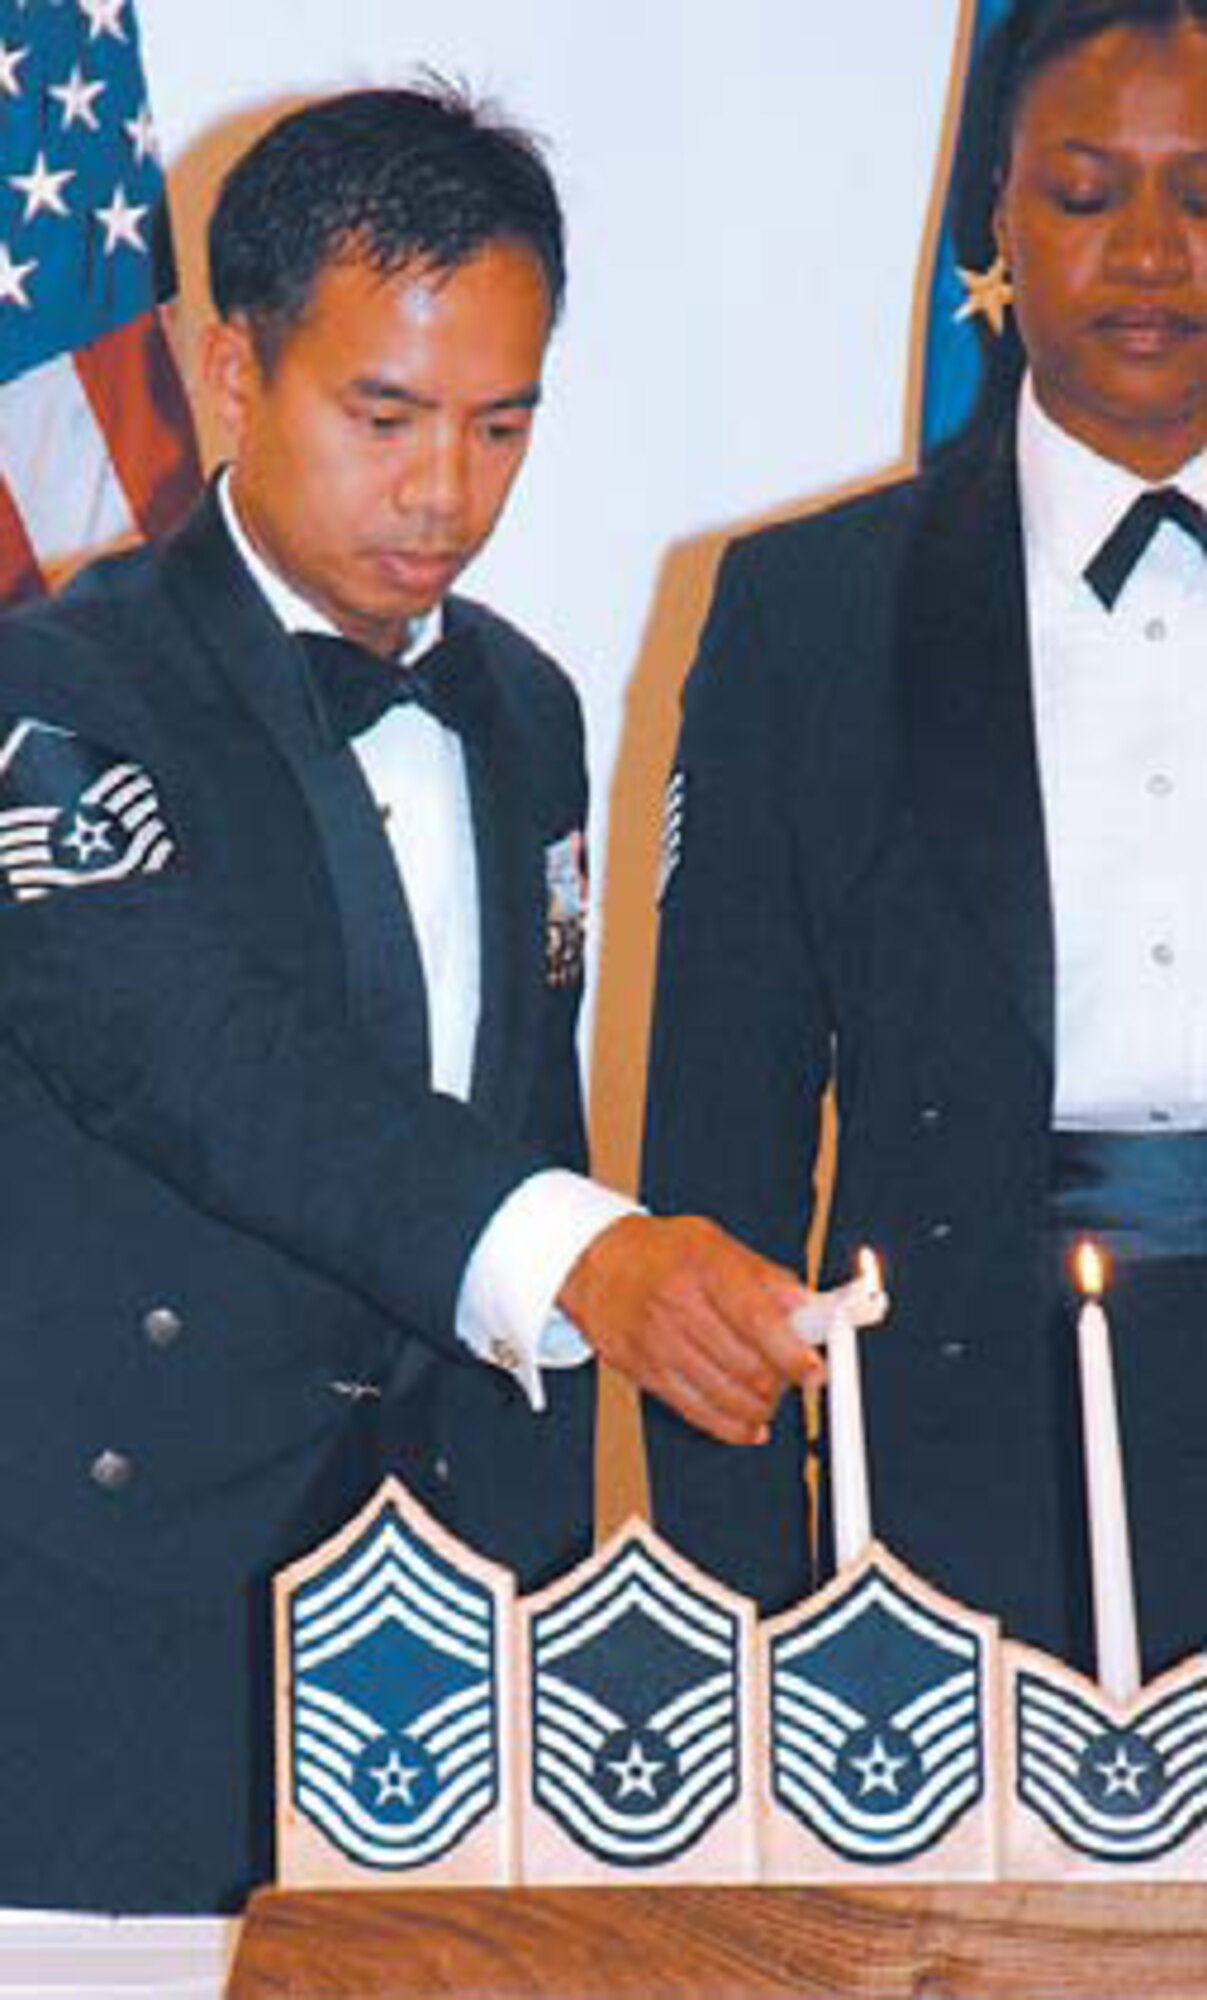 Master Sgt. Narciso Abutin, lights the Candelabra representing the nine enlisted grades of the Air Force.